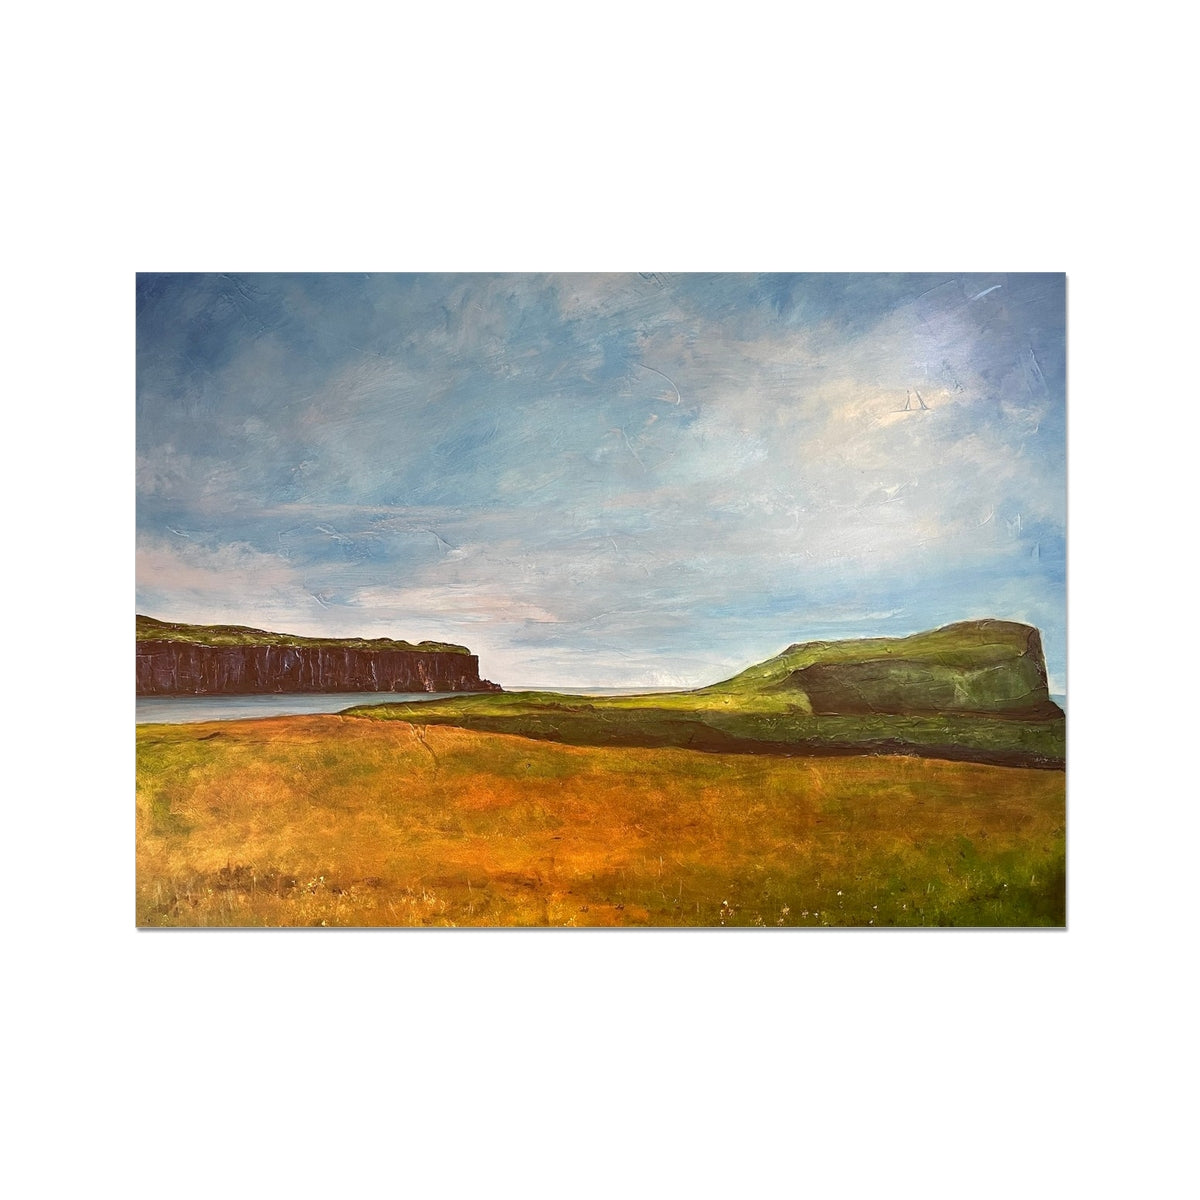 Approaching Oronsay Skye Painting | Fine Art Prints From Scotland-Unframed Prints-Skye Art Gallery-A2 Landscape-Paintings, Prints, Homeware, Art Gifts From Scotland By Scottish Artist Kevin Hunter